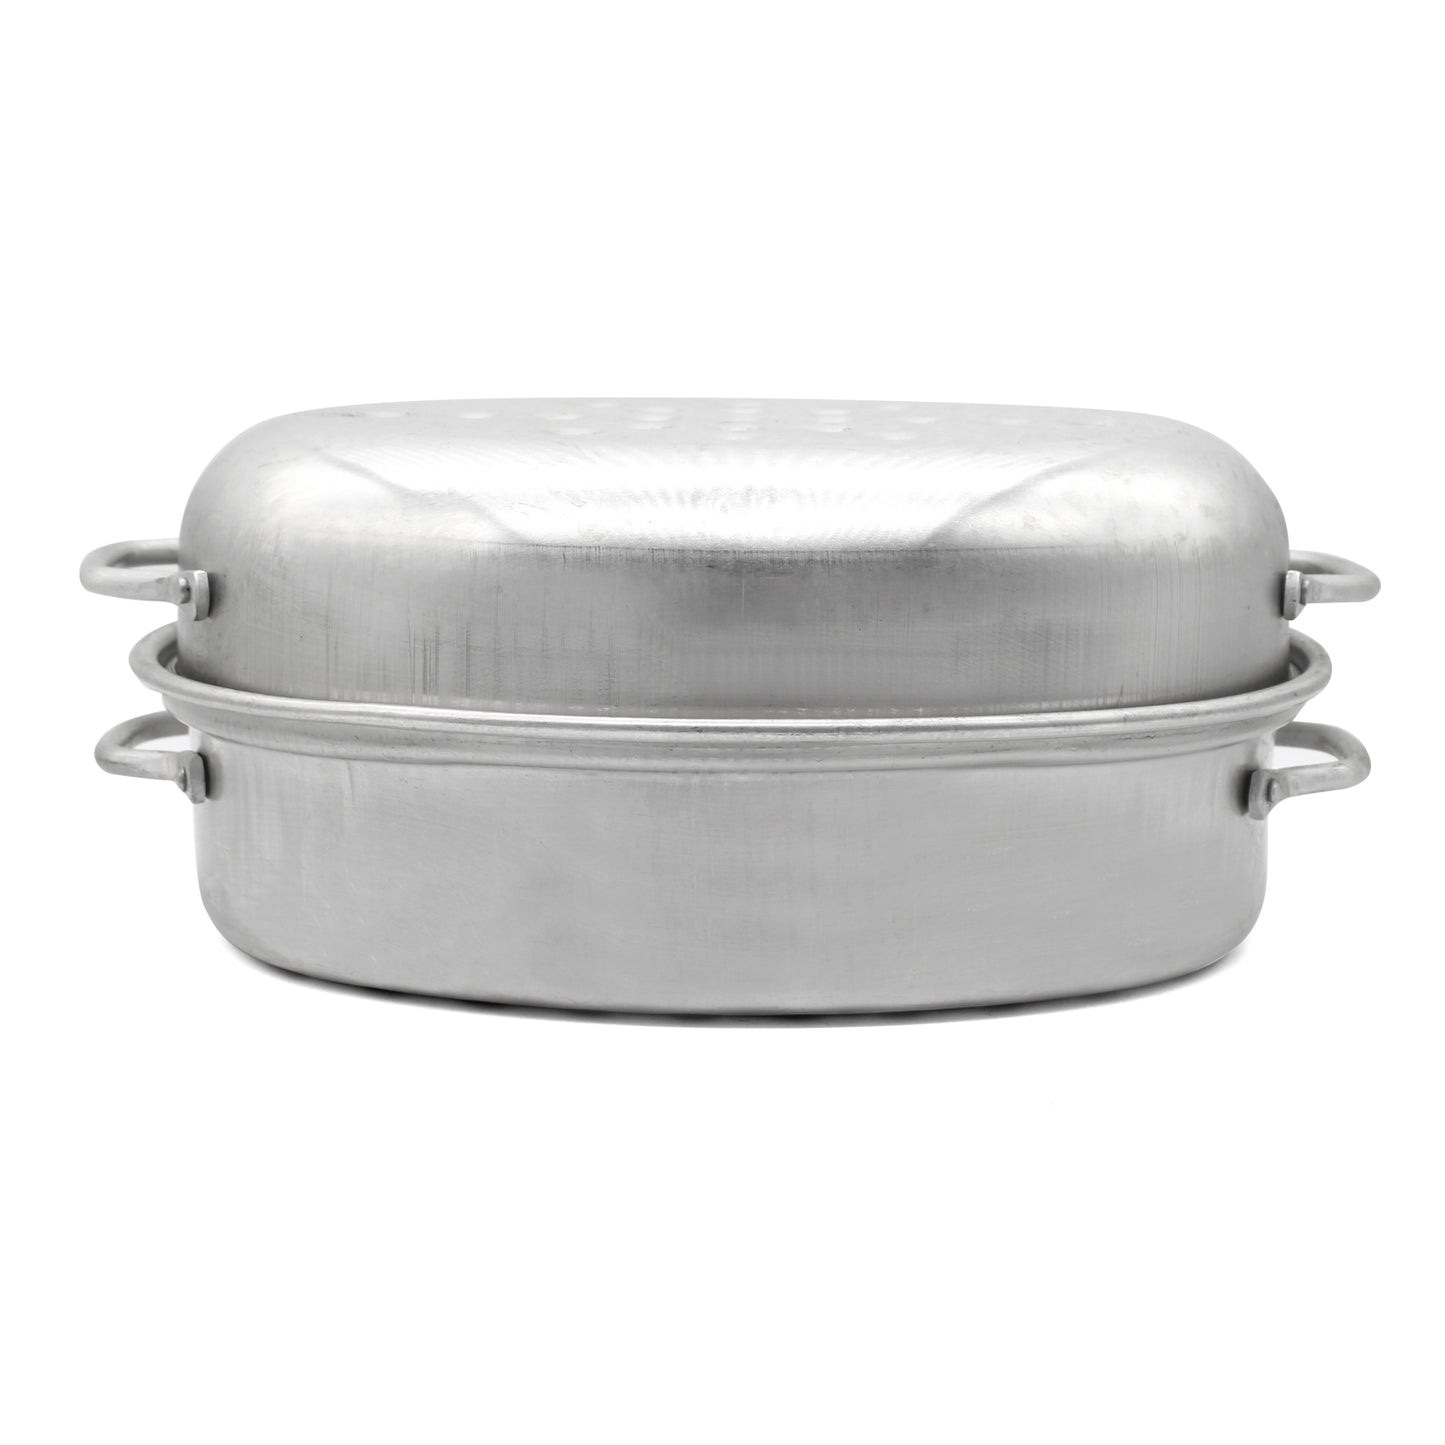 Oval Casserole Dish with Lid